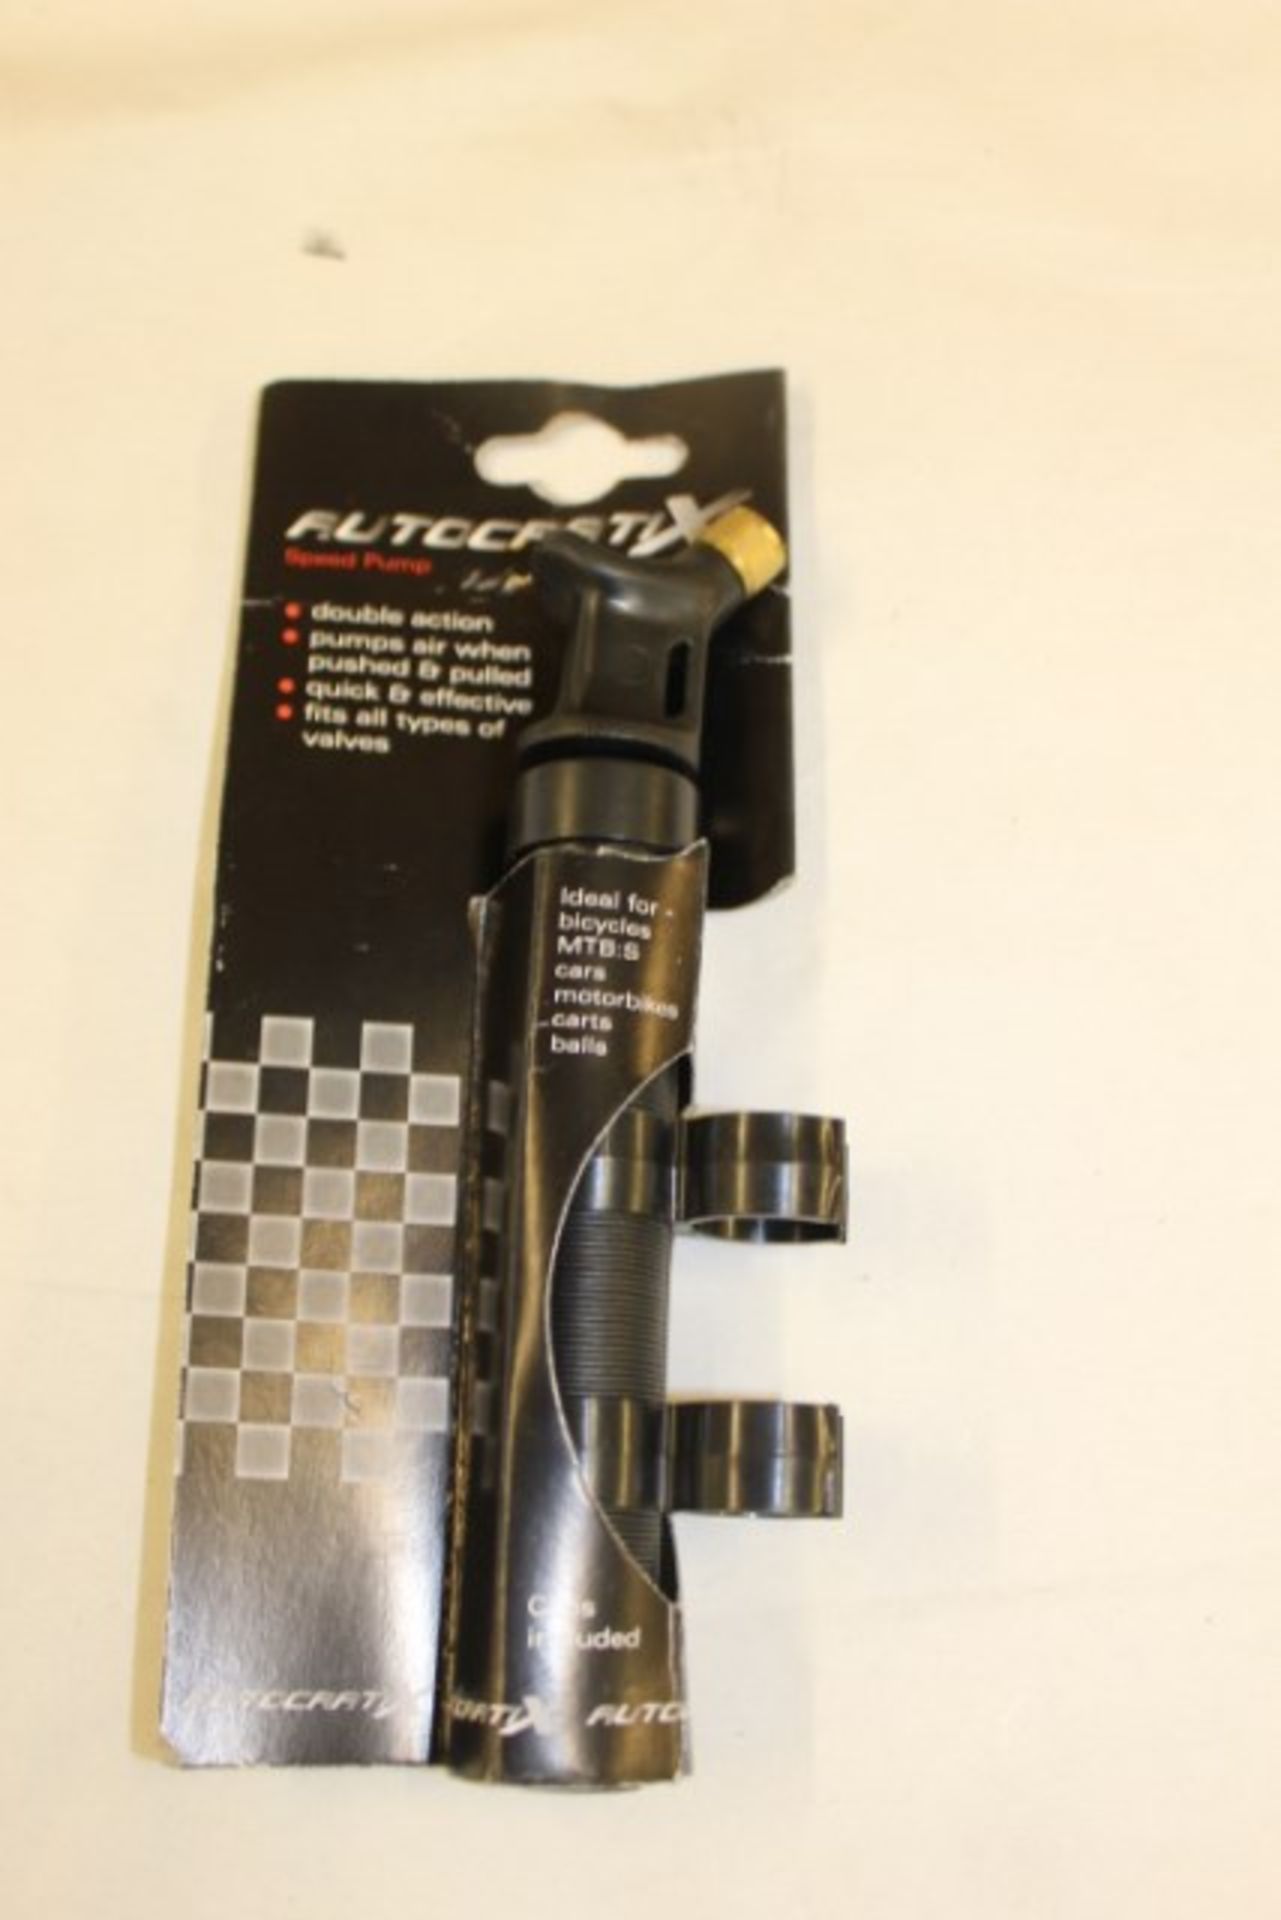 V Autocratix Double Action Bicycle Speed Pump X 2 YOUR BID PRICE TO BE MULTIPLIED BY TWO